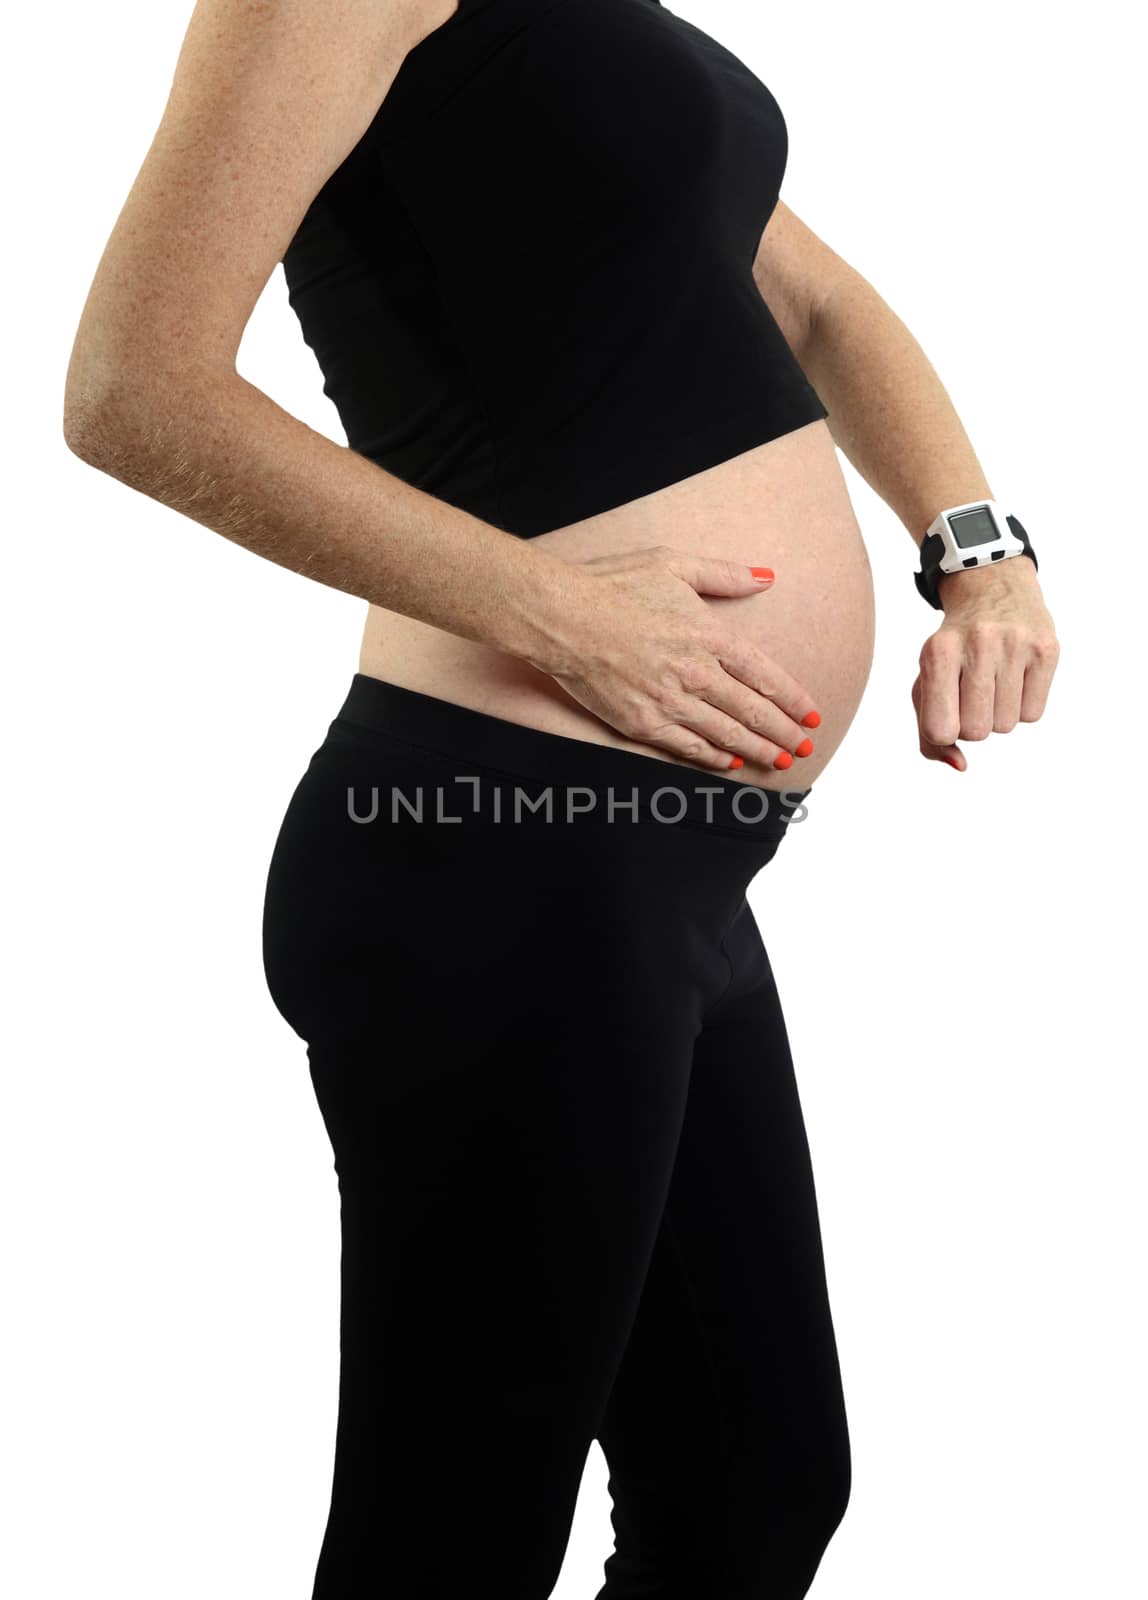 timing contractions and going into labor during pregnancy